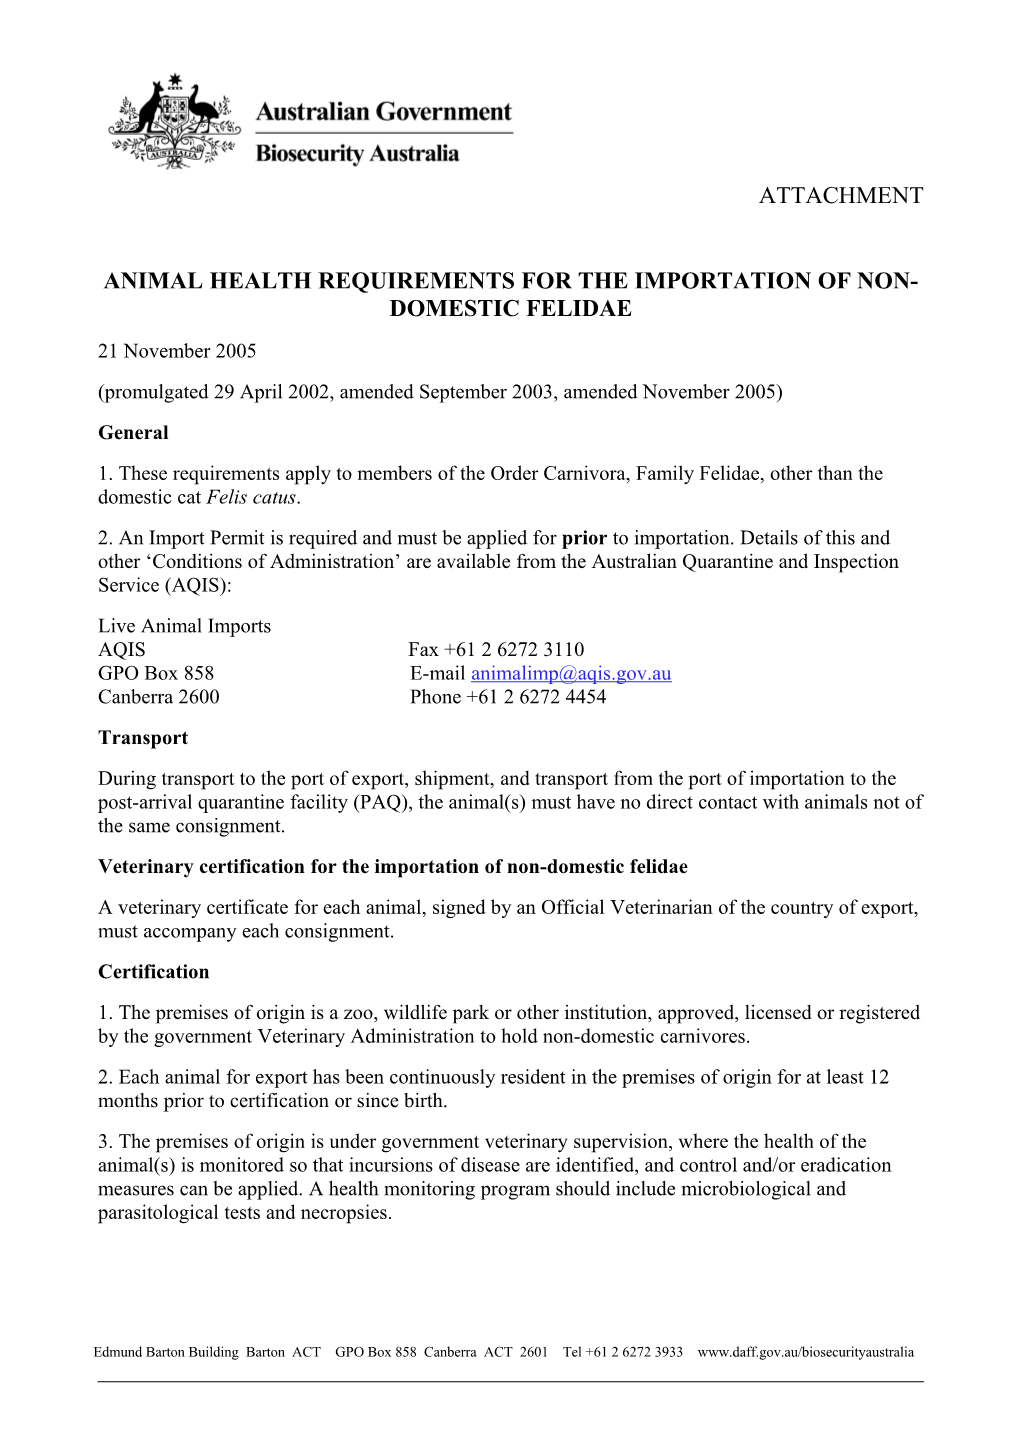 Animal Health Requirements for the Importation of Non-Domestic Felidae